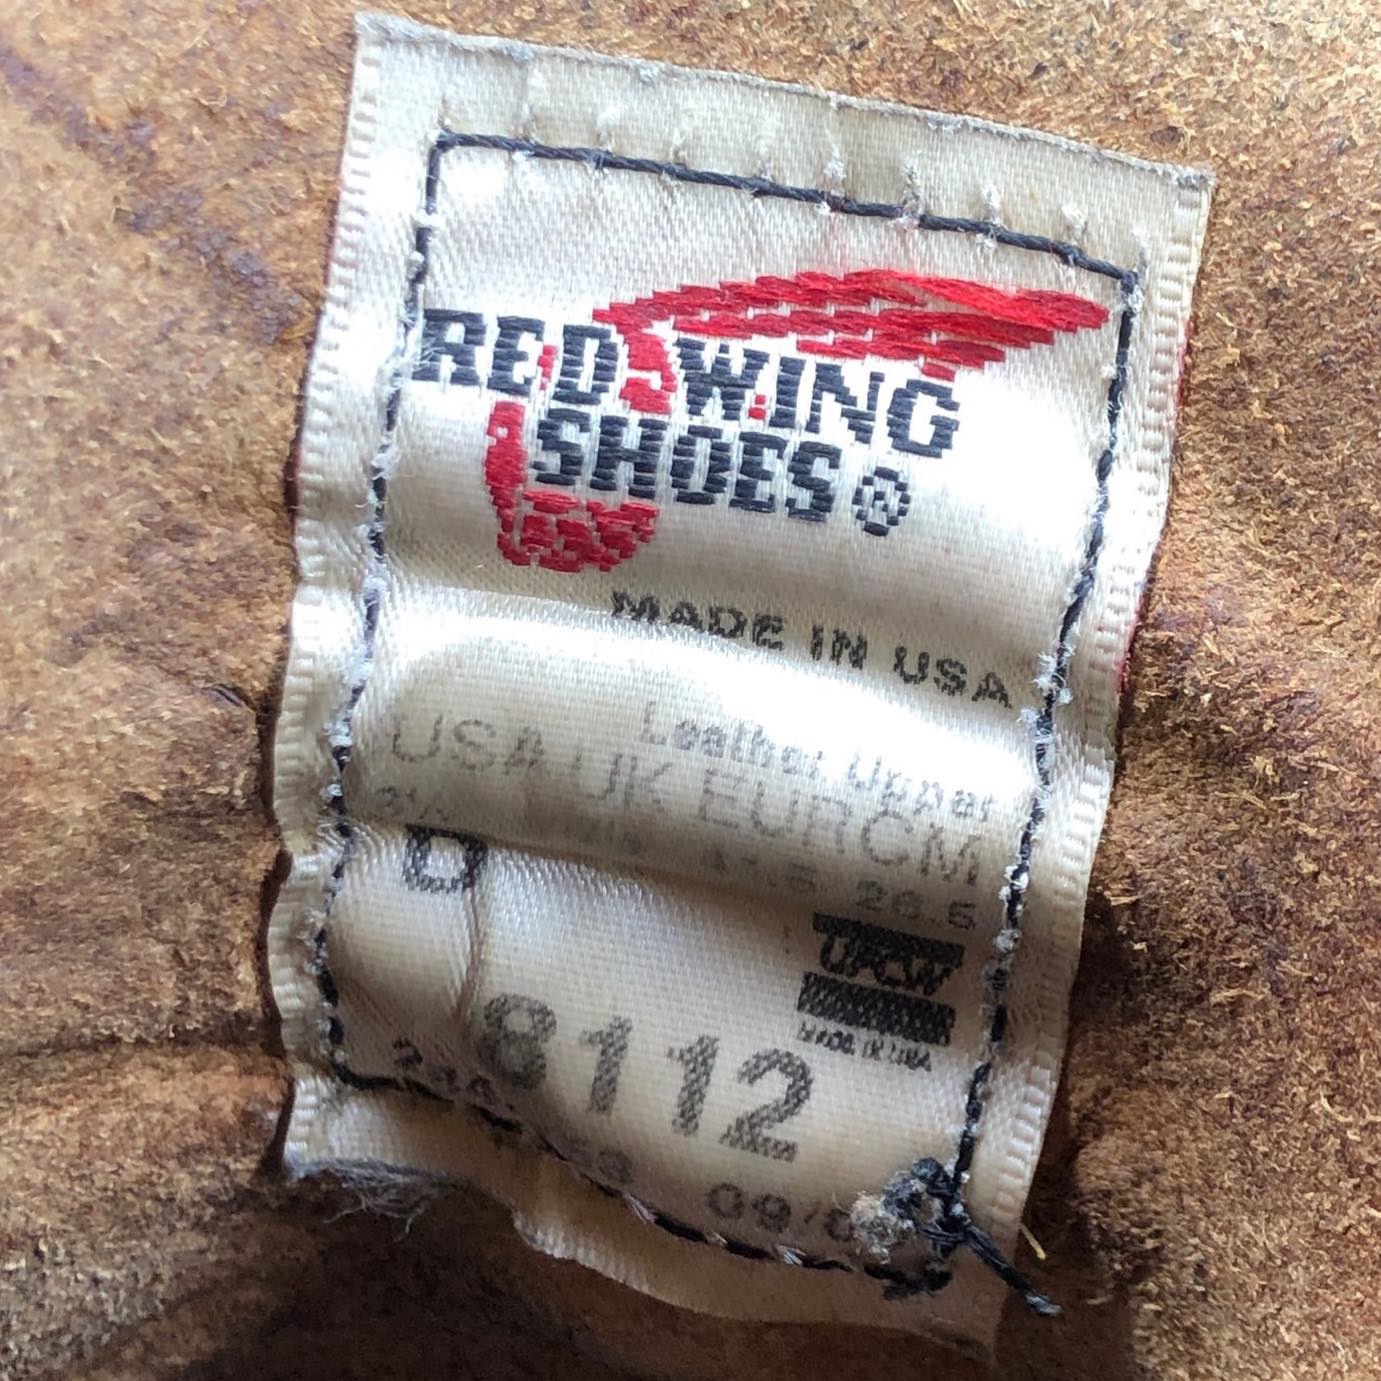 Red Wing Iron Ranger Boots Size 8.5D - 41.5 EUR - 26.5cm